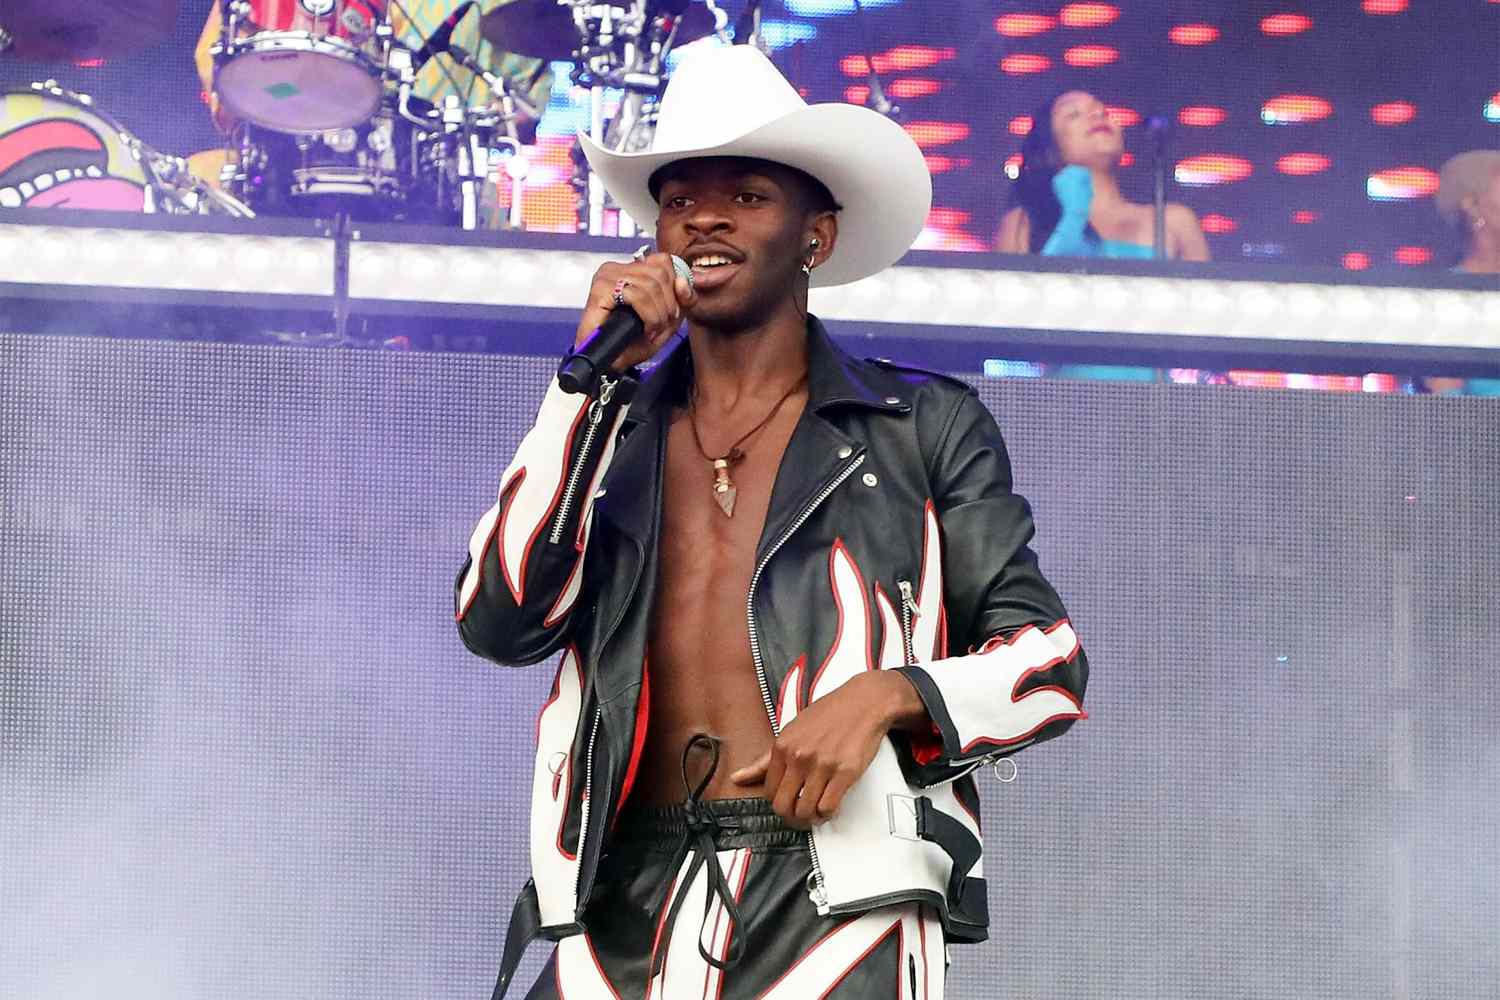 BOSTON, MA - MAY 25: Lil Nas X performs onstage during Day 2 of 2019 Boston Calling Music Festival on May 25, 2019 in Boston, Massachusetts. (Photo by Taylor Hill/Getty Images for Boston Calling)